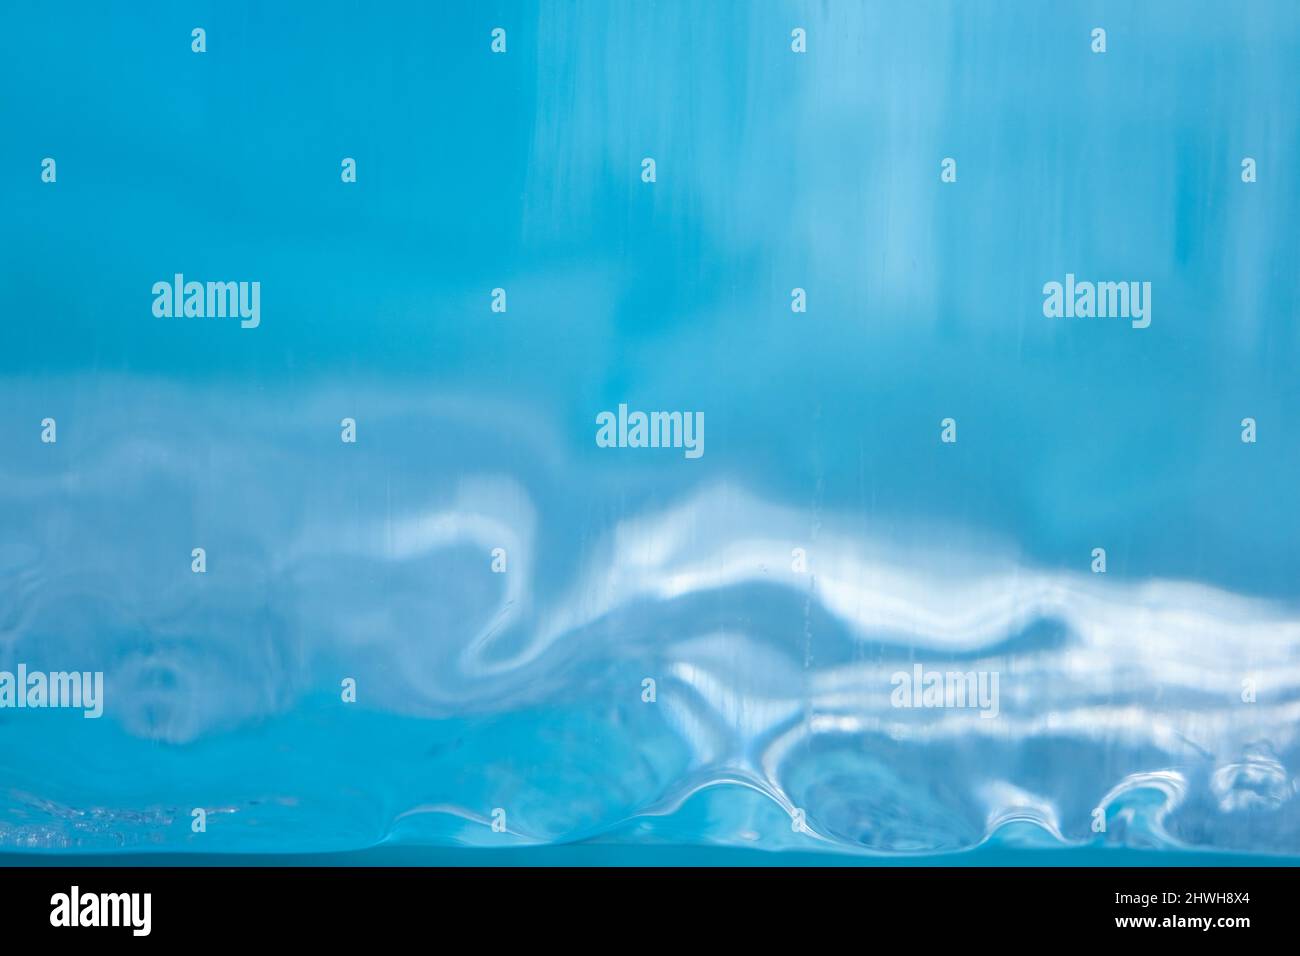 Blue ice abstract textured background Stock Photo